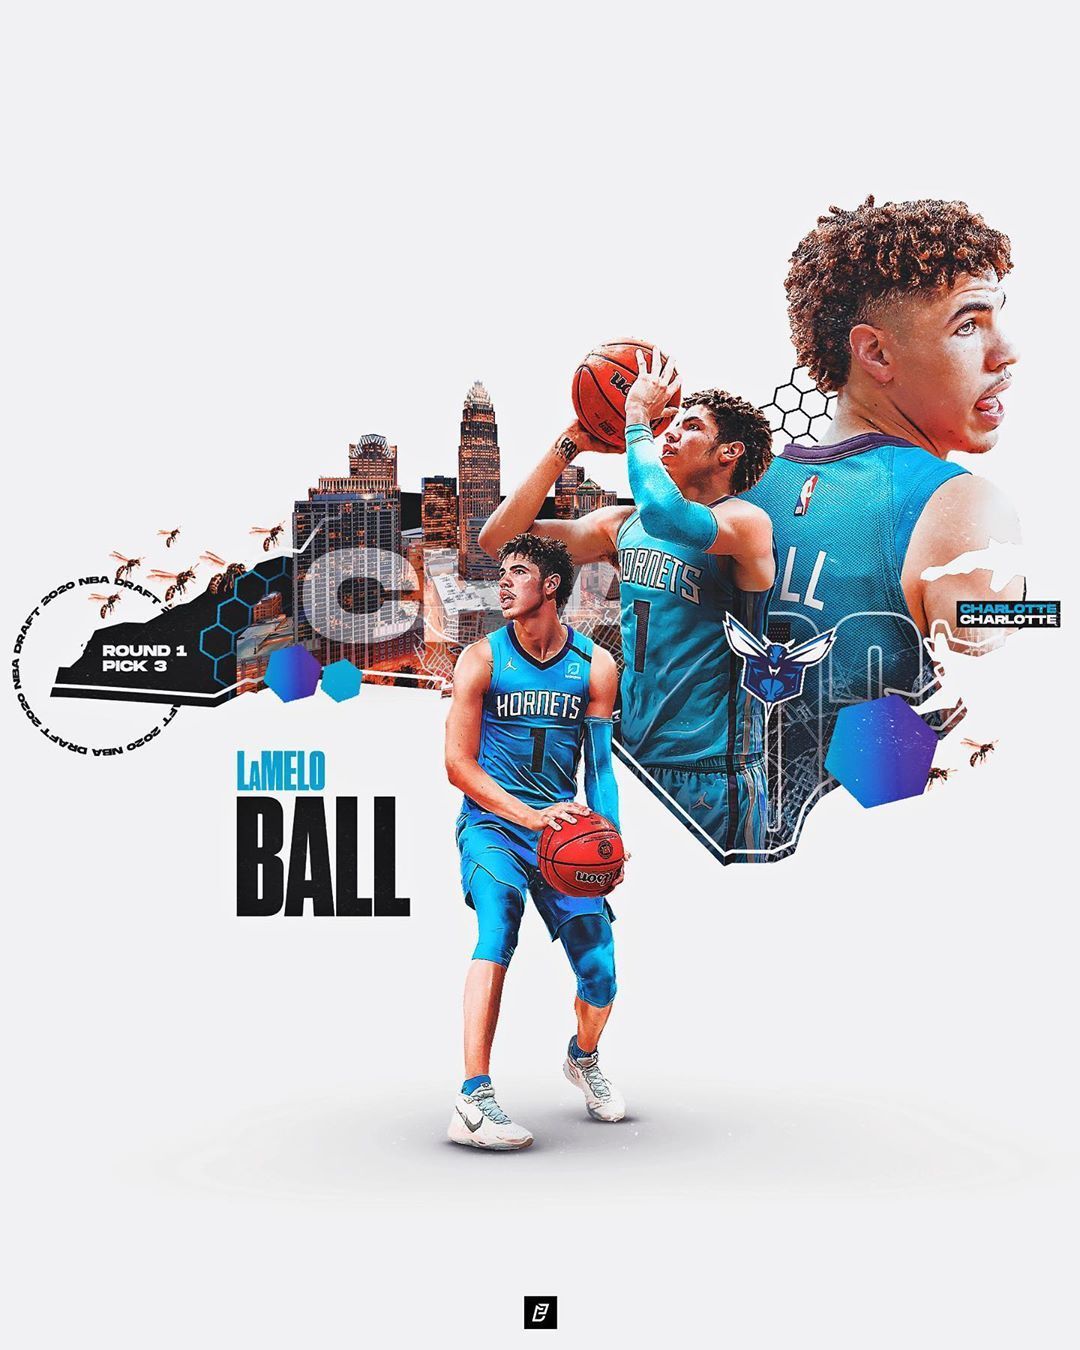 Enrique Castellano on Instagram: “With the third pick in the 2020 NBA Draft, the Charlotte Hornets are expected to draft Illa. Lamelo ball, Nba, Charlotte hornets